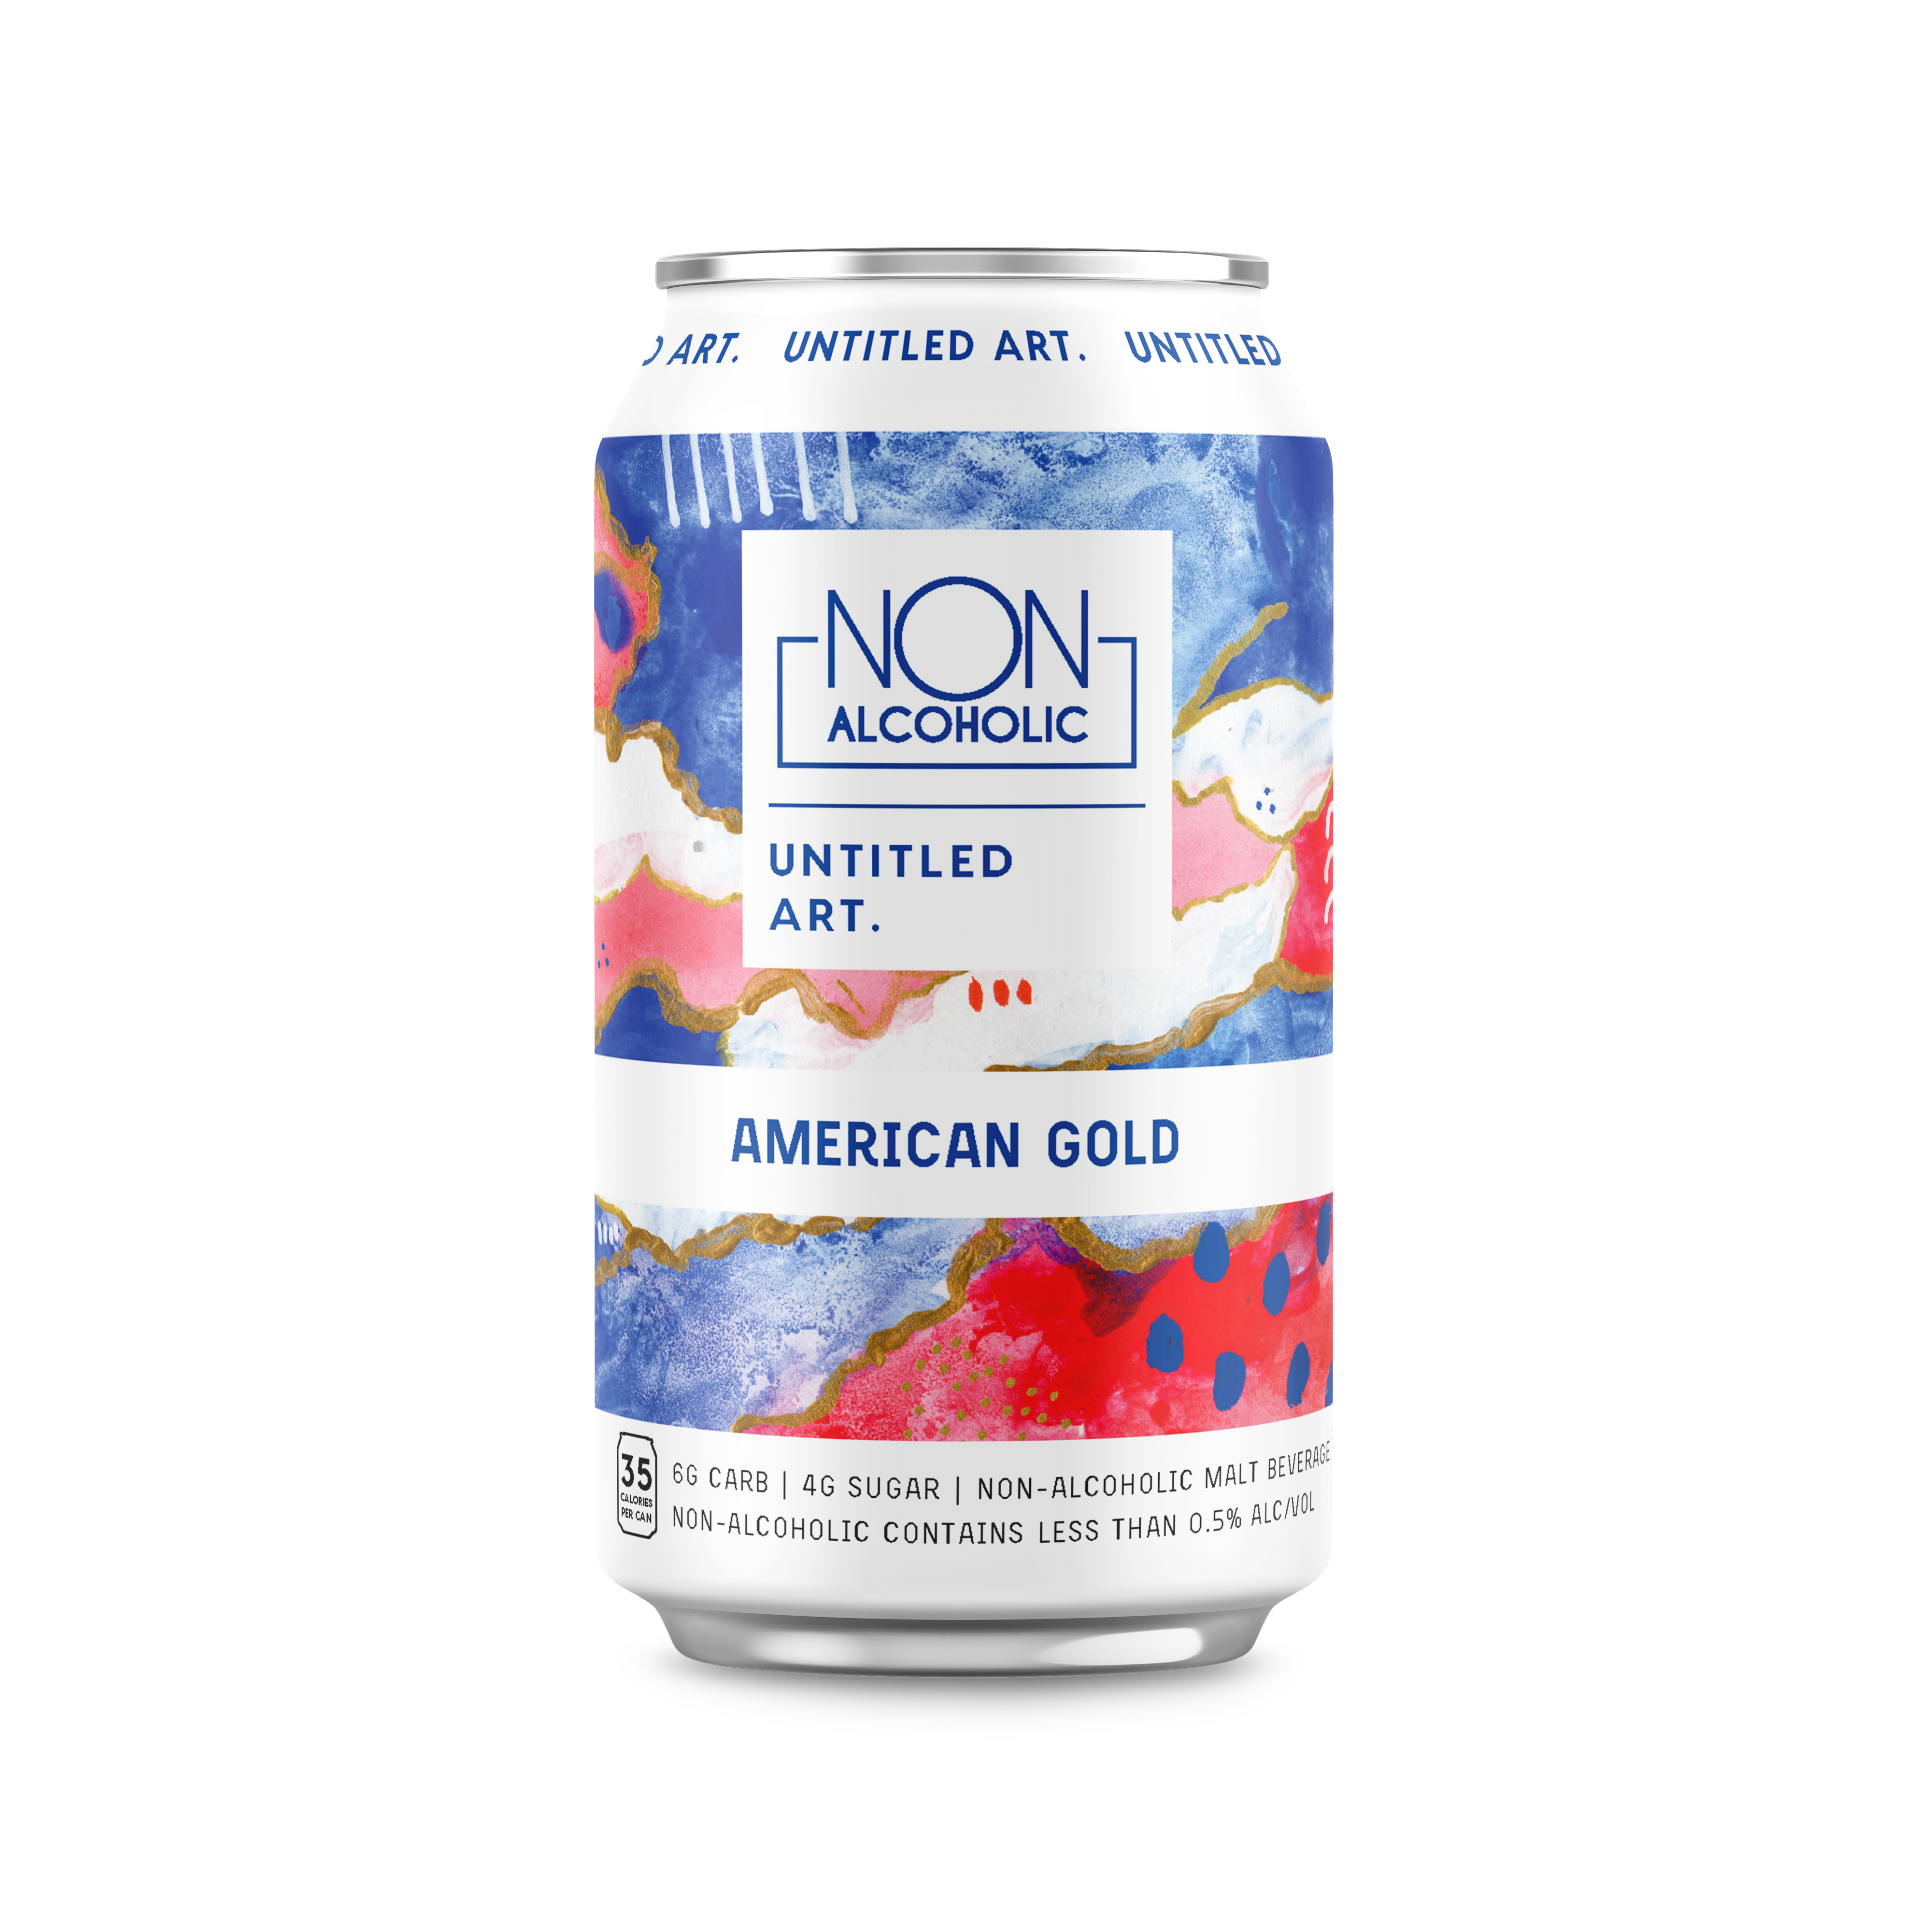 A can of non-alcoholic american gold.